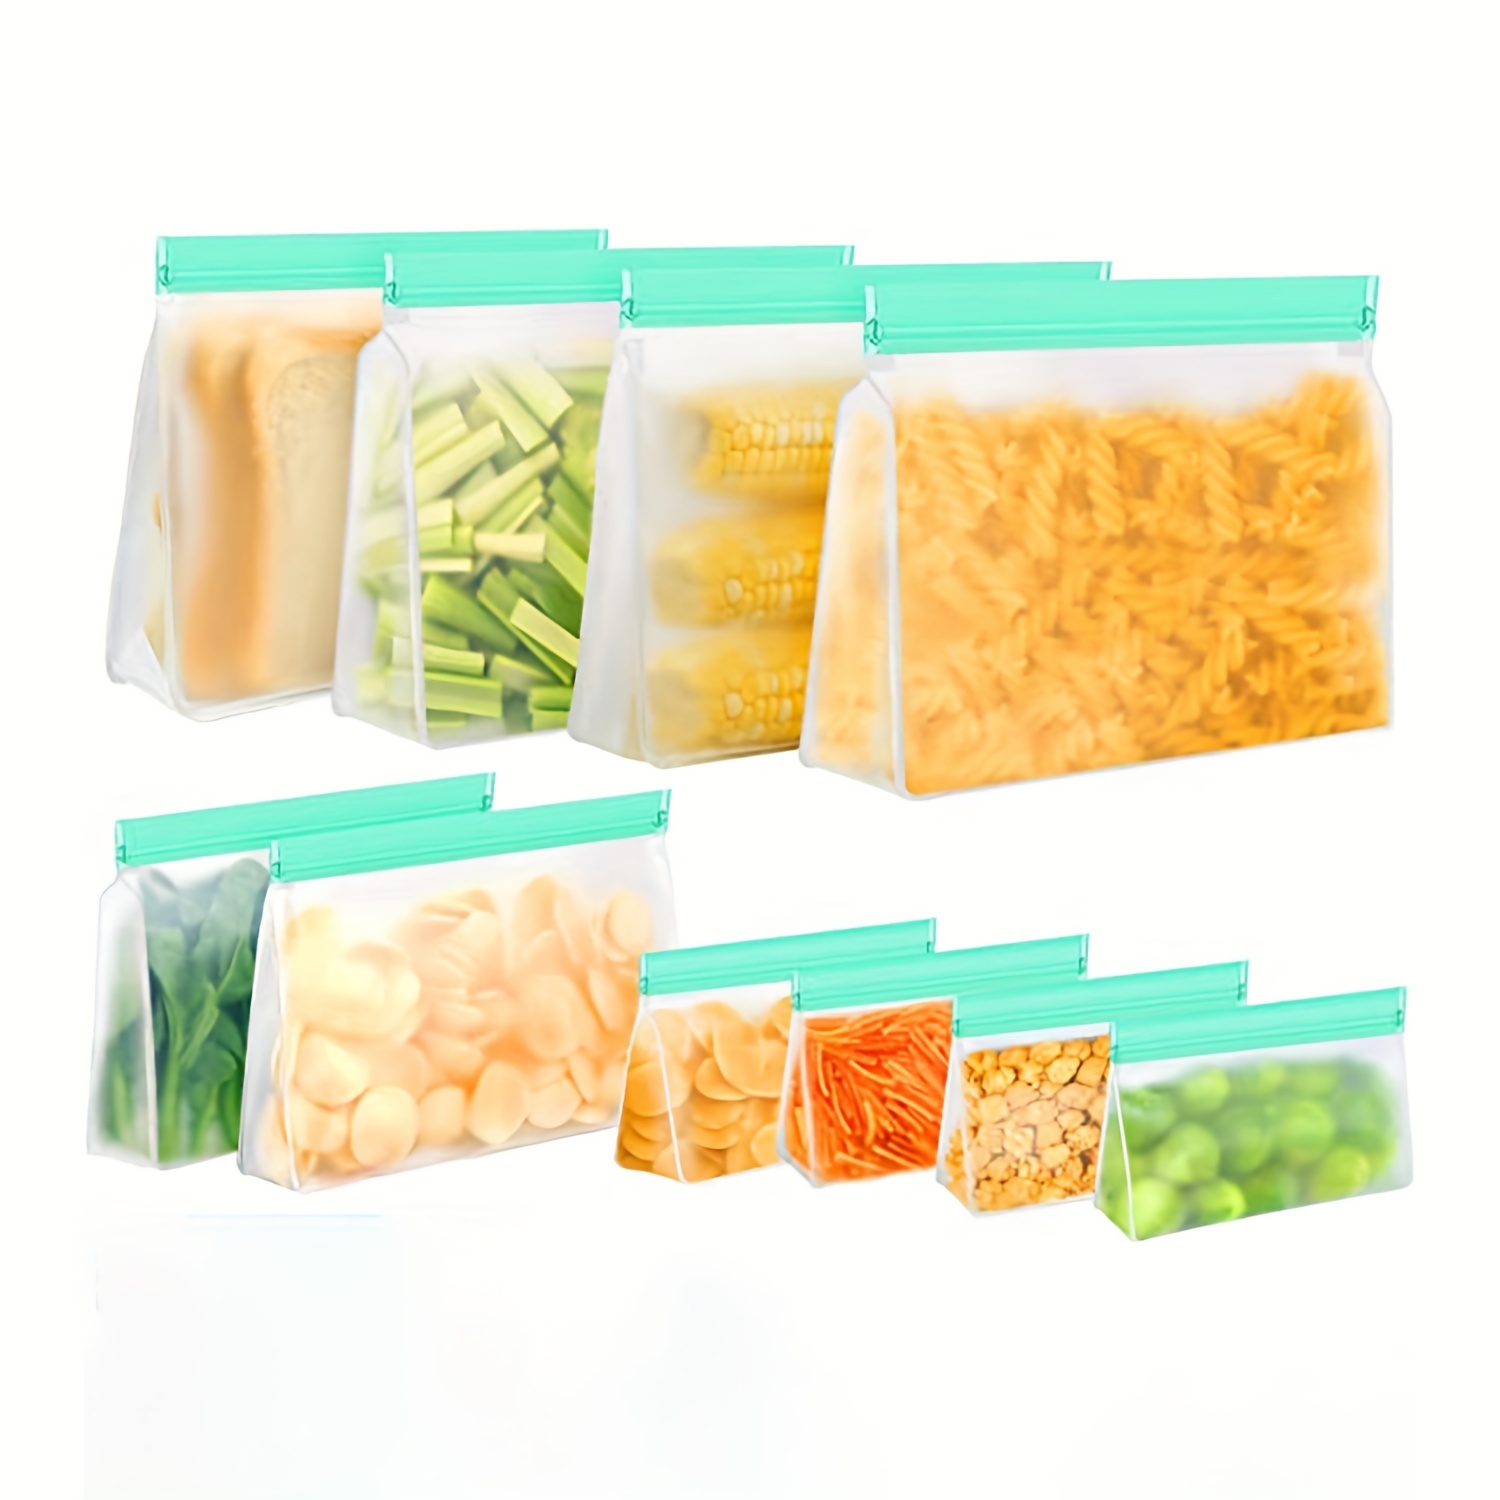 Durbl-Silicone Stand-up Freezer Bags for Food Storage -New Set(Set of 3)